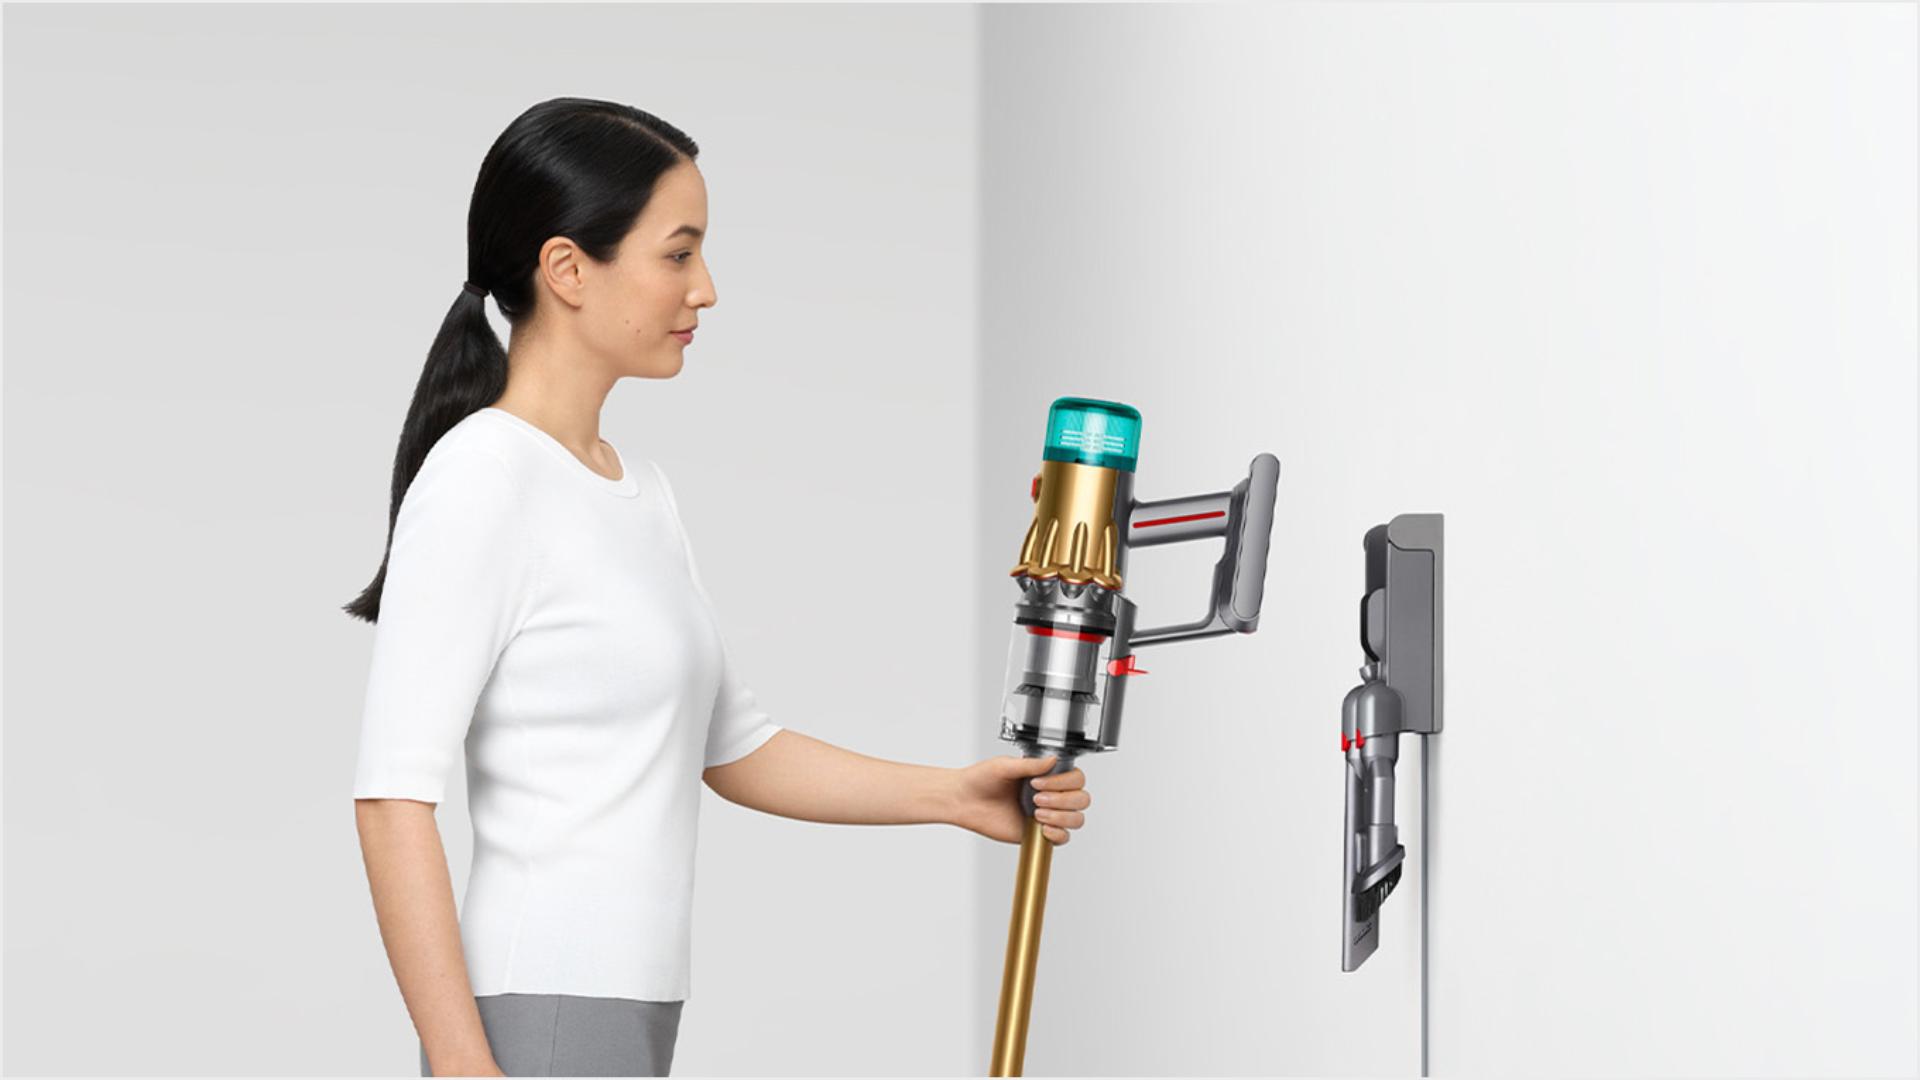 Person dropping machine in wall dock